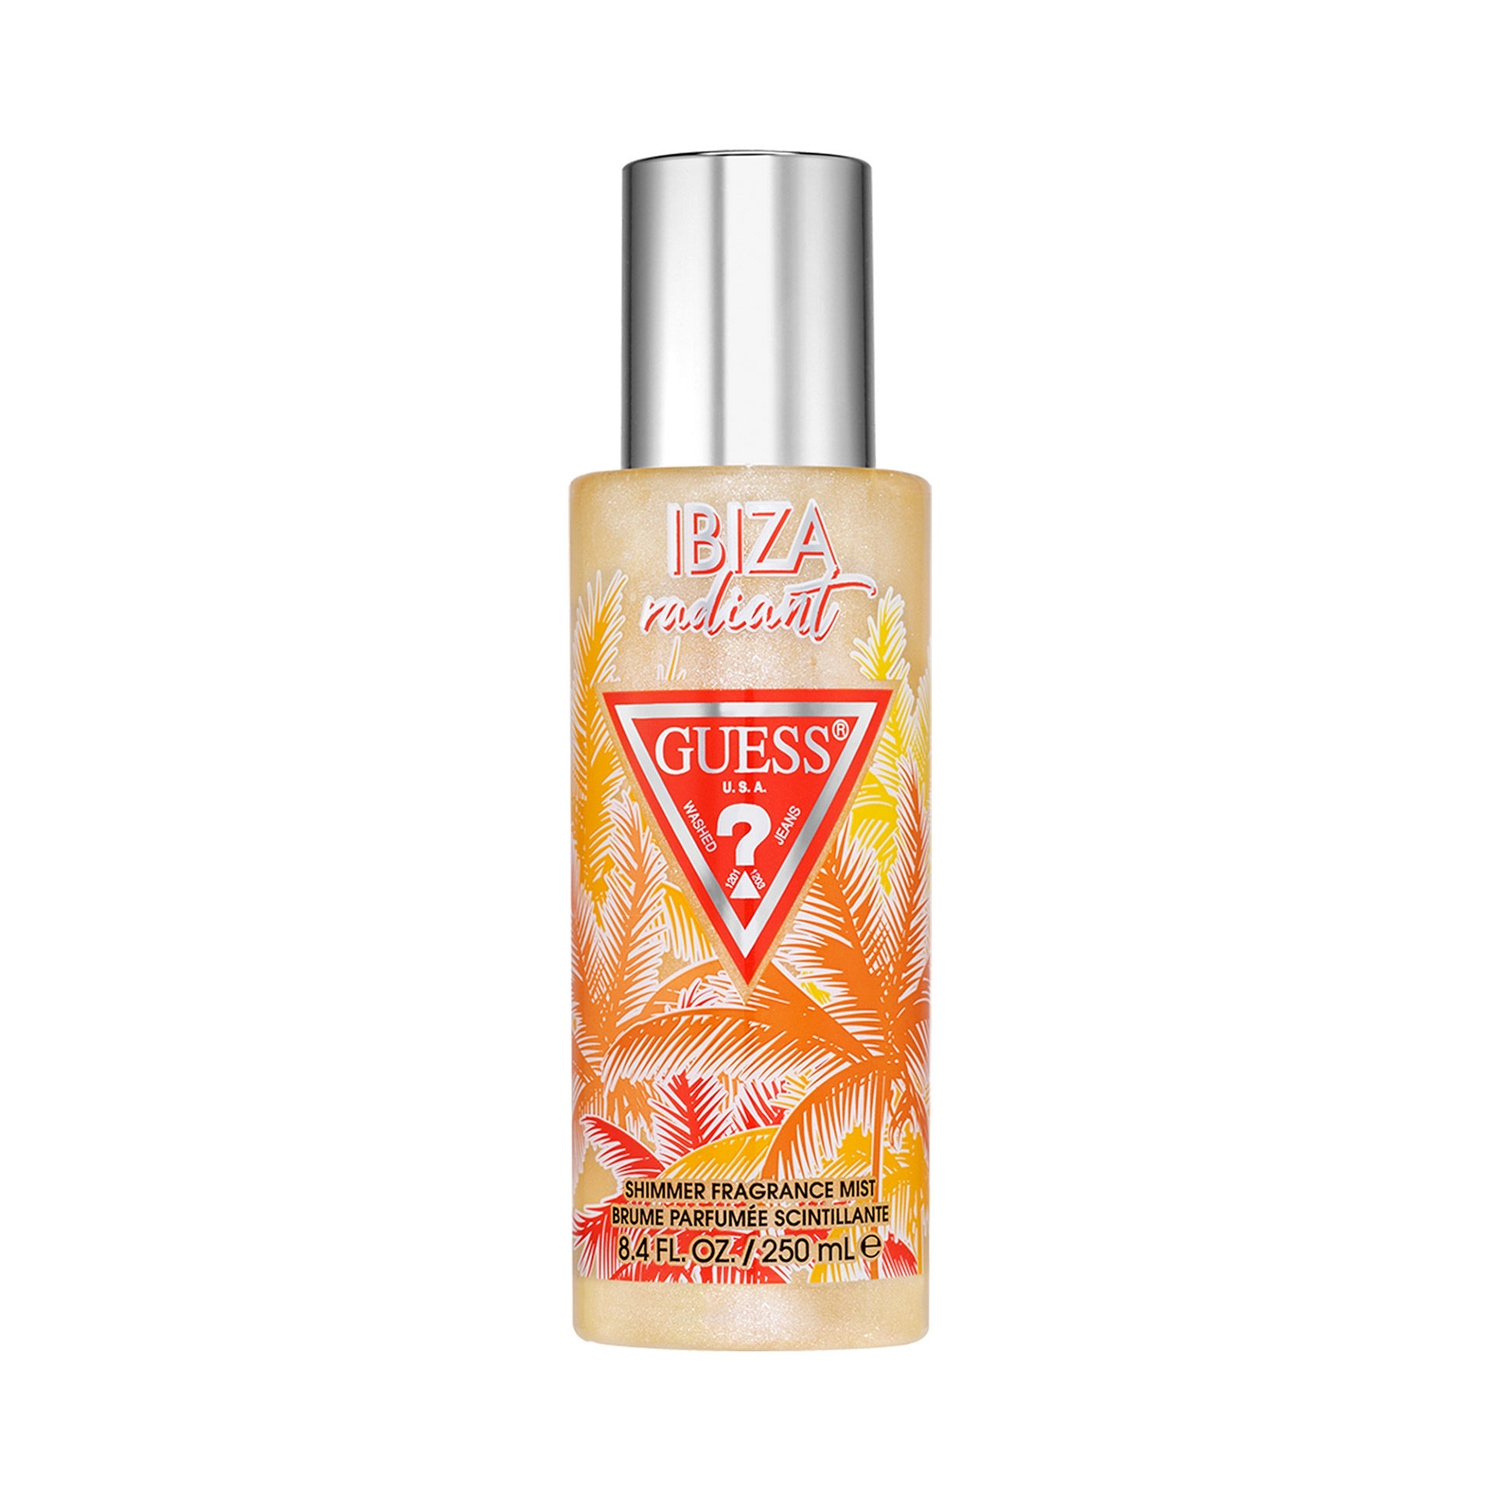 Guess | Guess Destination Ibiza Radiant Shimmer Fragrance Body Mist (250ml)